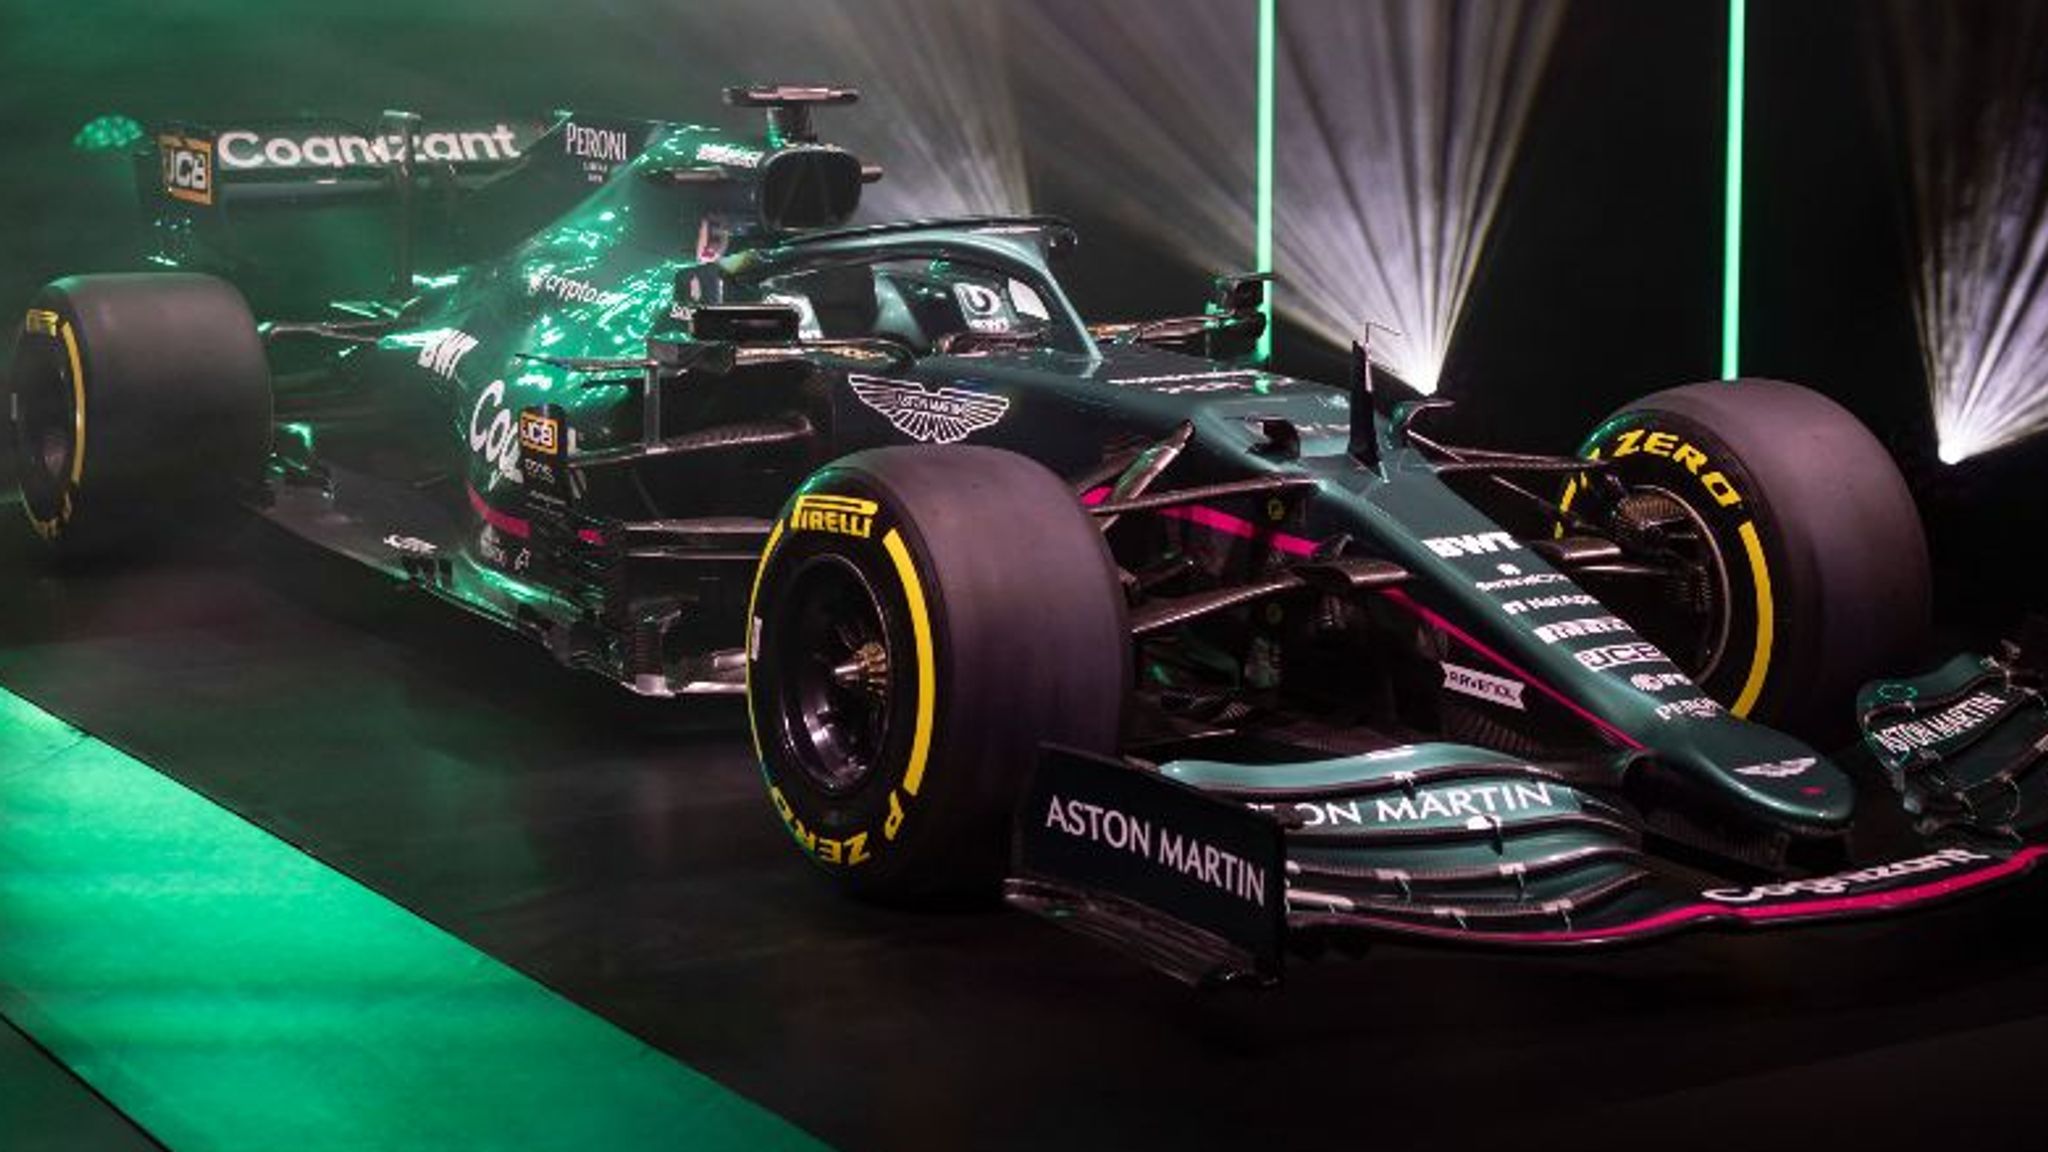 Aston Martin licensed to thrill in Formula 1 return as 2021 car revealed with historic green livery